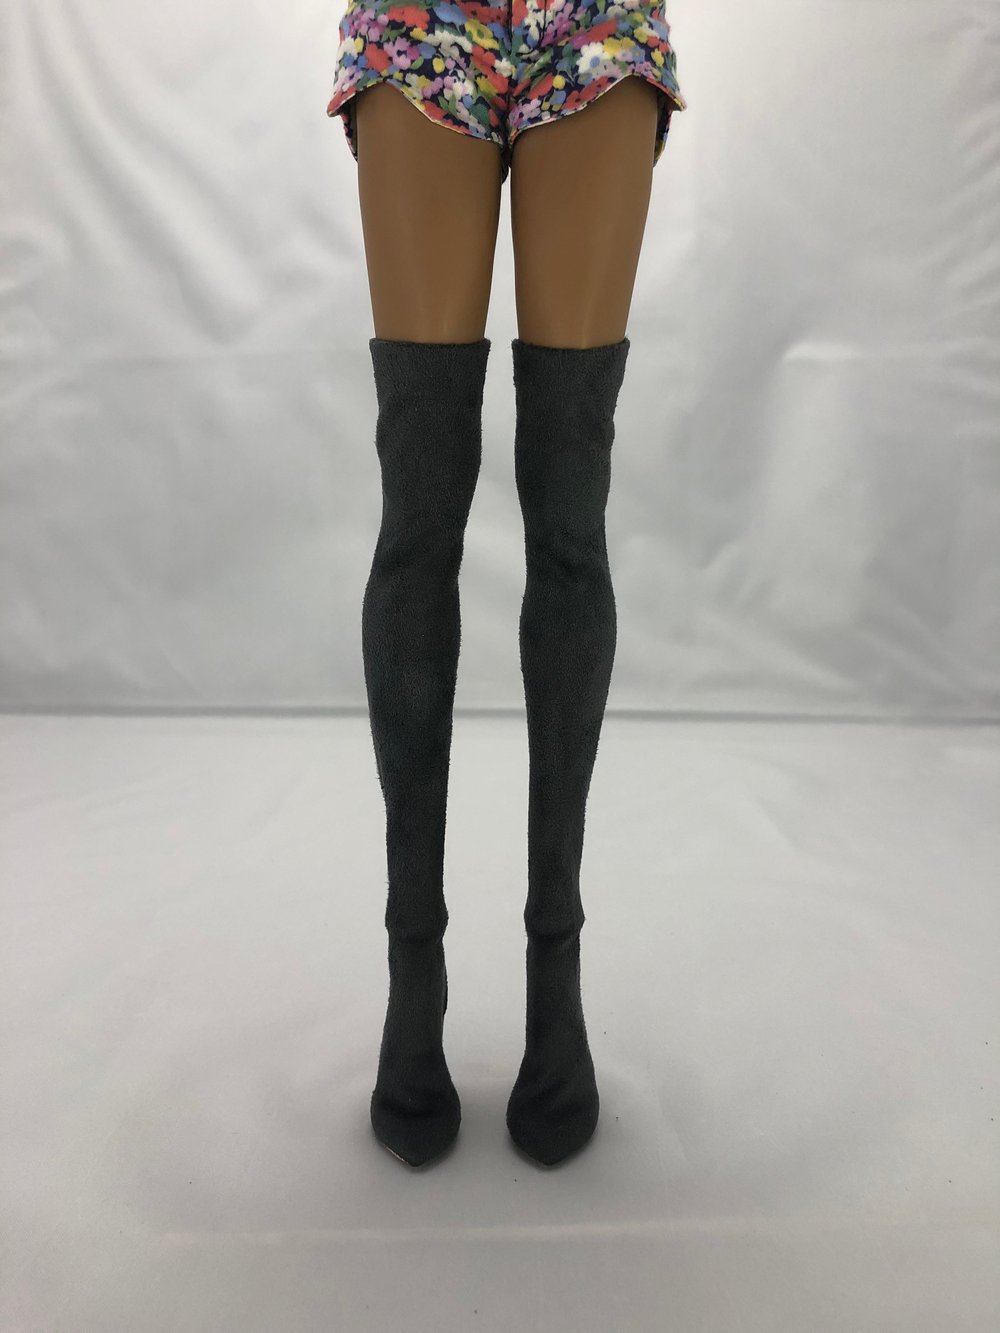 Gray Suede Thigh High Boots: Pidgin Doll  Pair 2